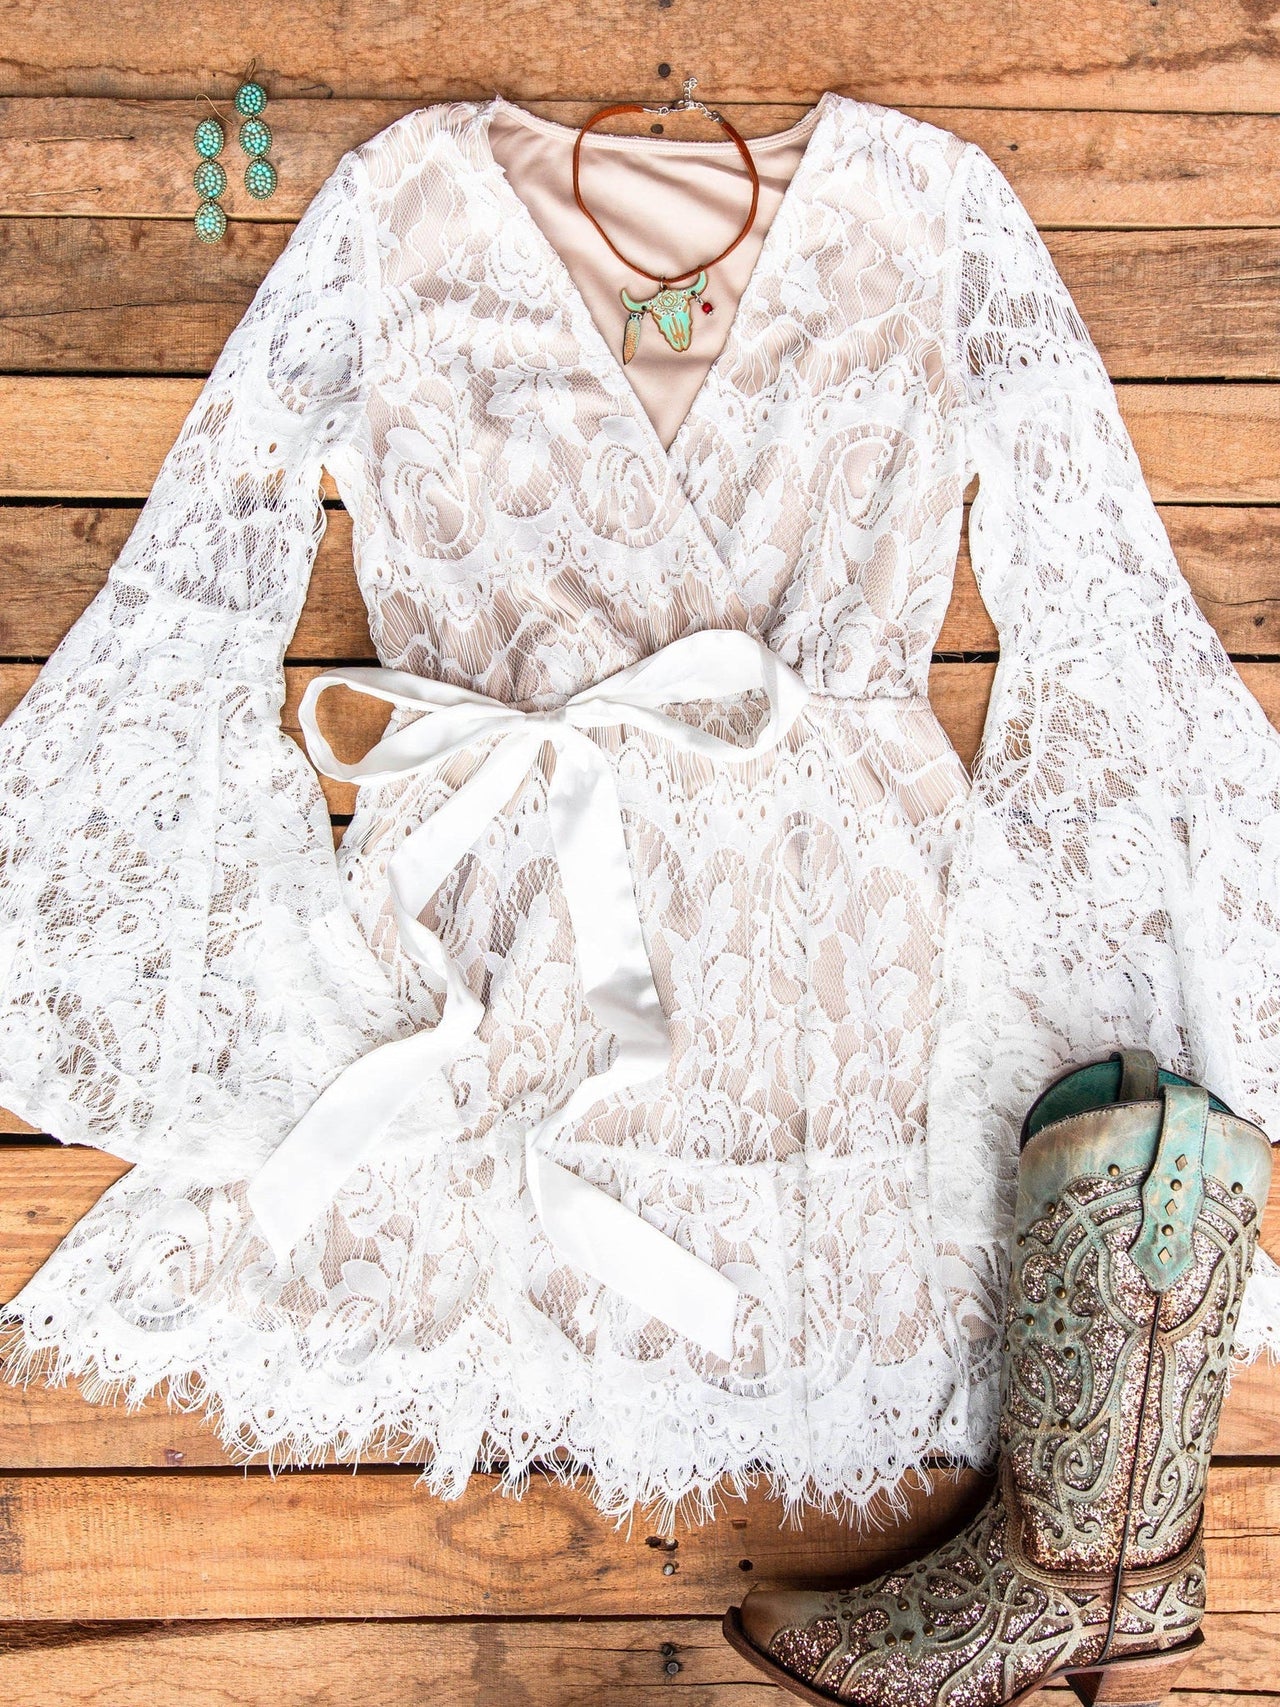 Lacey Belle Dress - White-Dresses-Southern Fried Chics